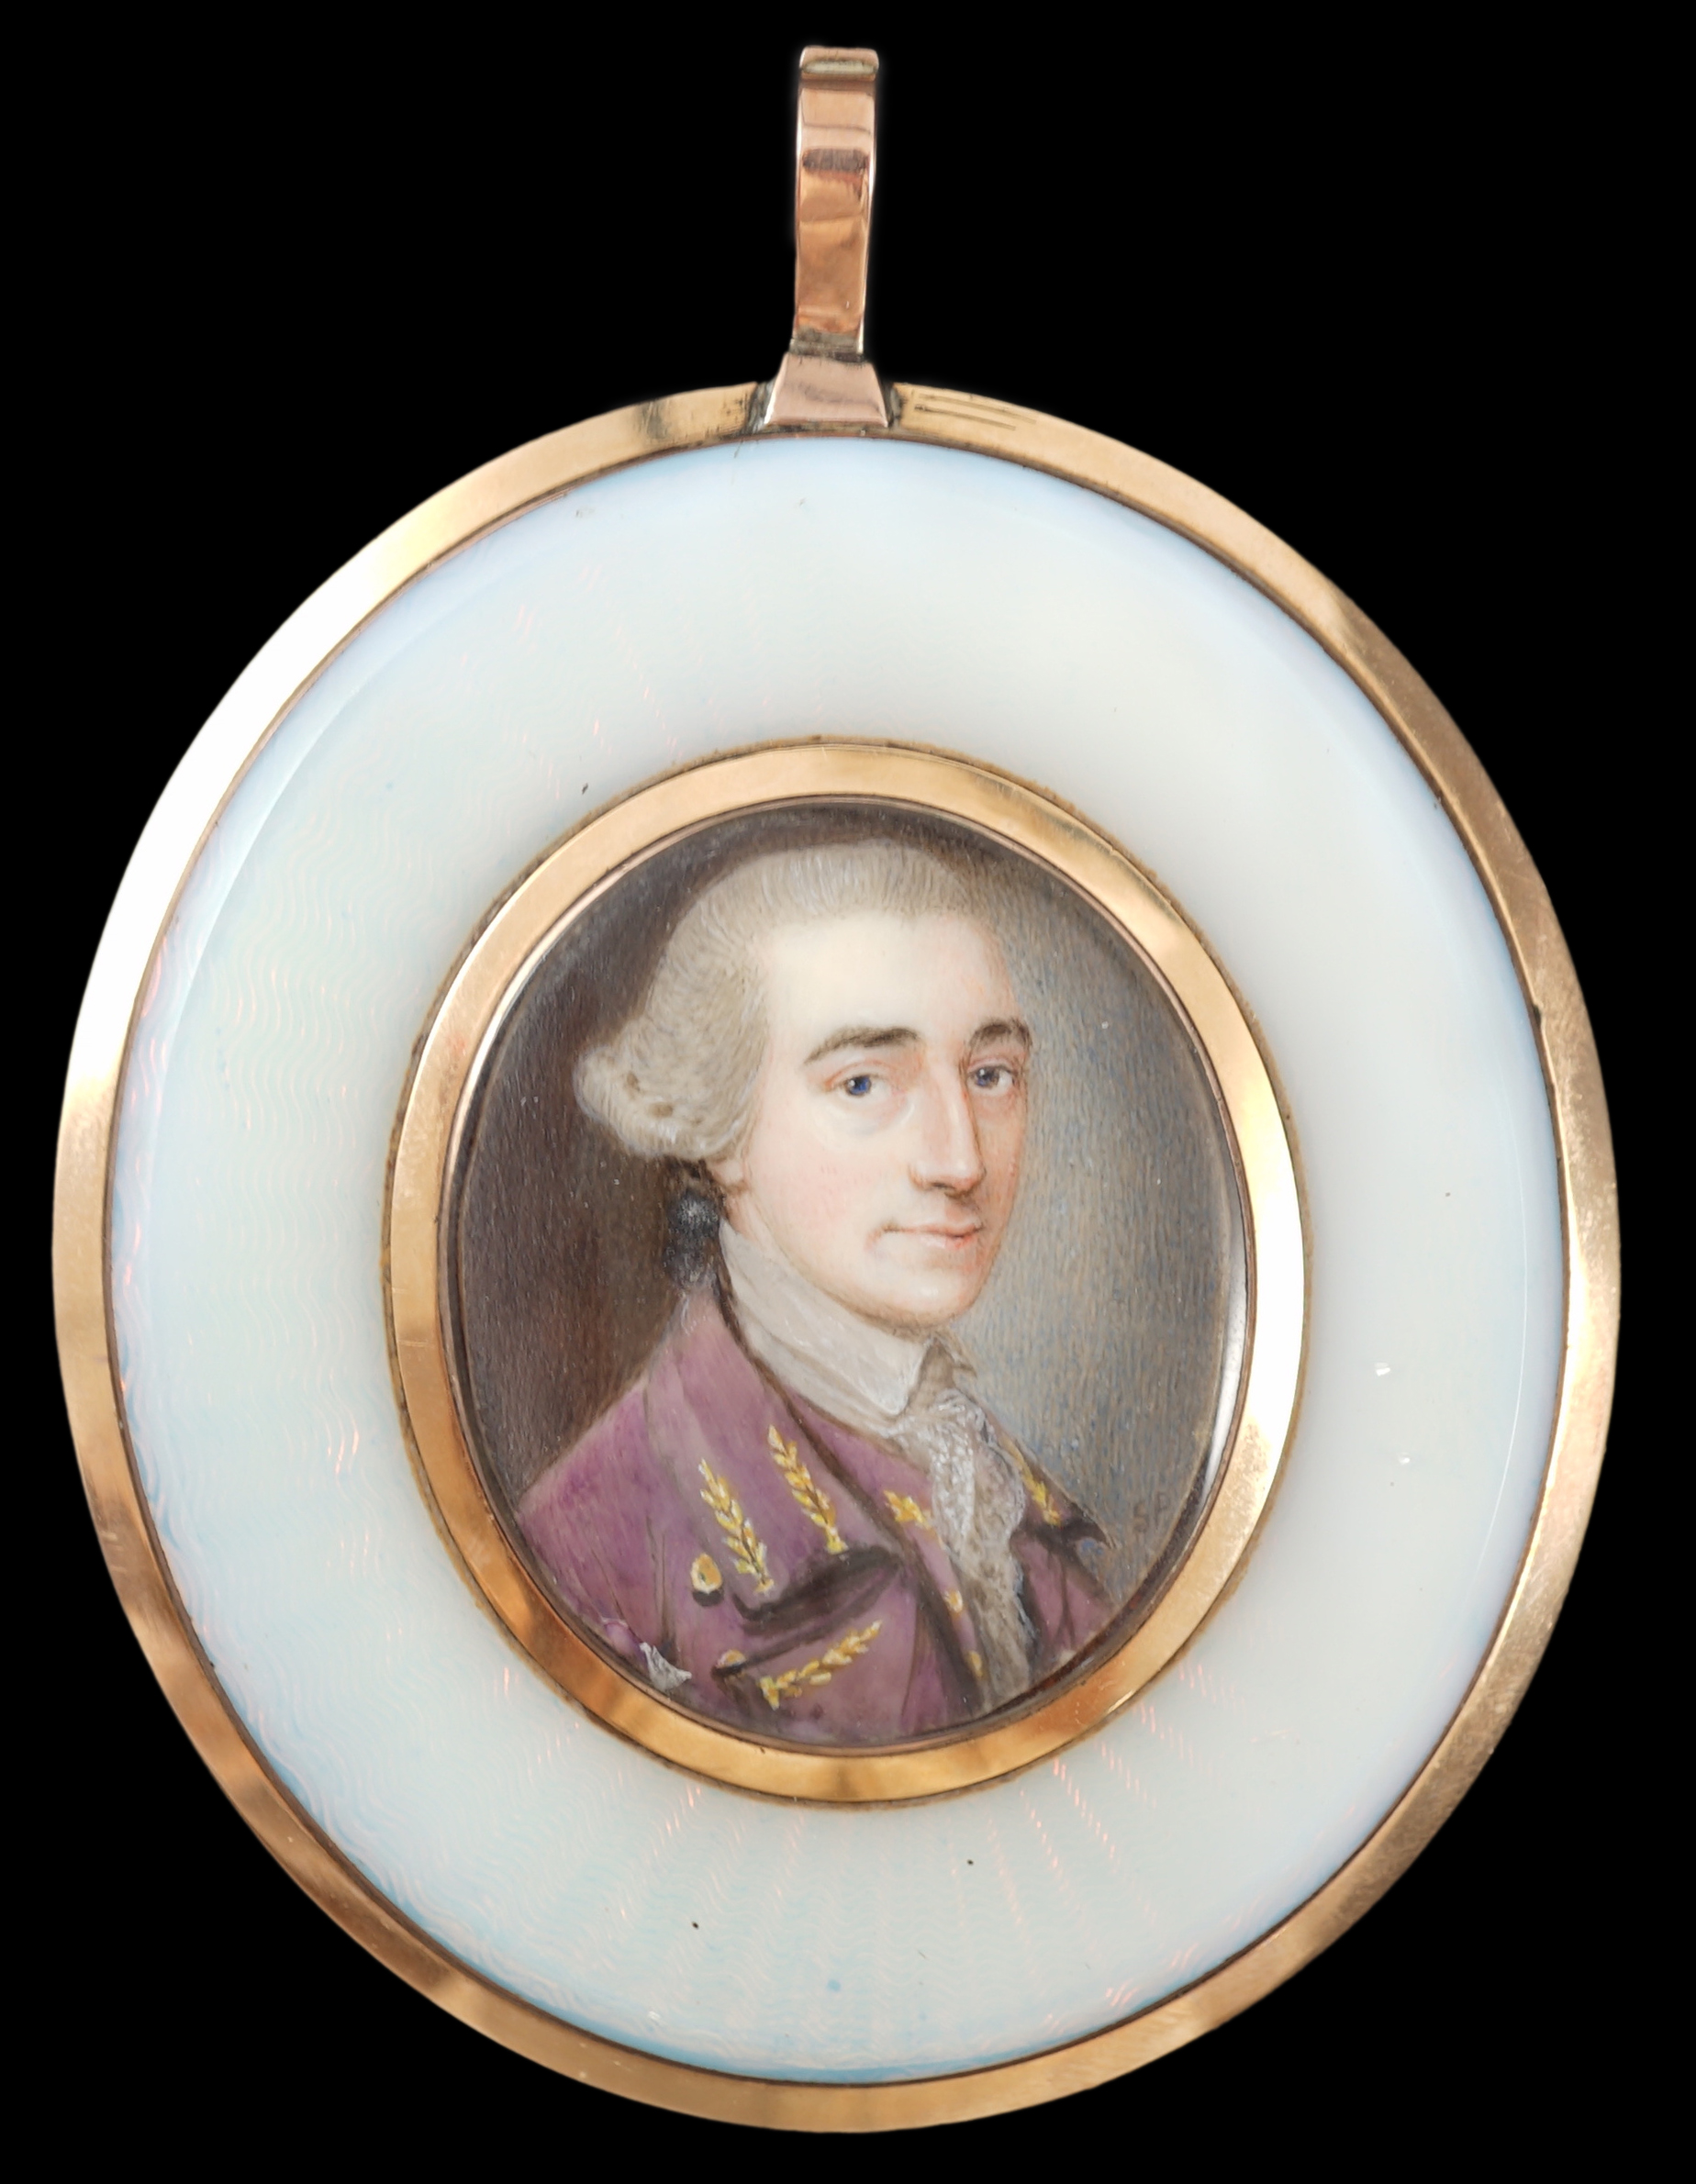 Attributed to Simon Pine (Irish, d.1772), Portrait miniature of a gentleman, watercolour on ivory, 3.8 x 3.1cm CITES Submission reference DBTEB7JM